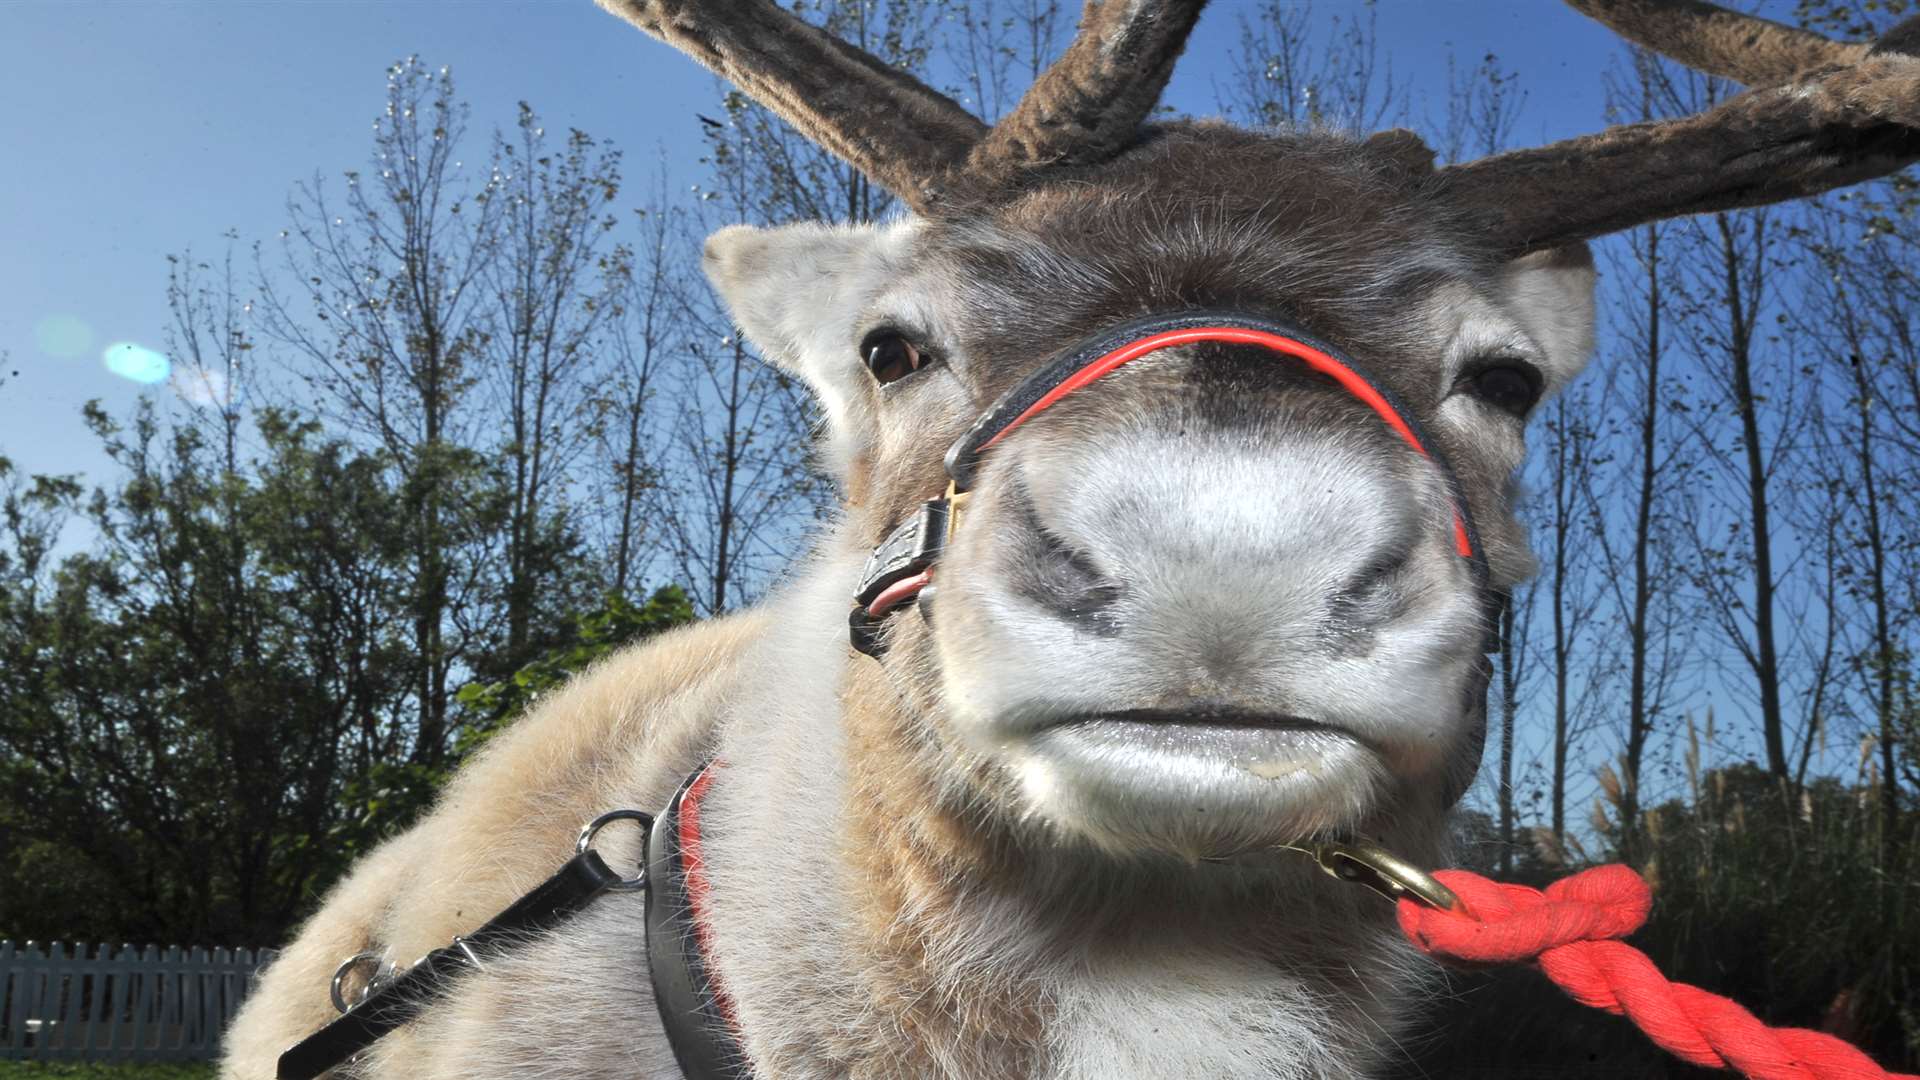 Youngsters will be able to pet the reindeer.